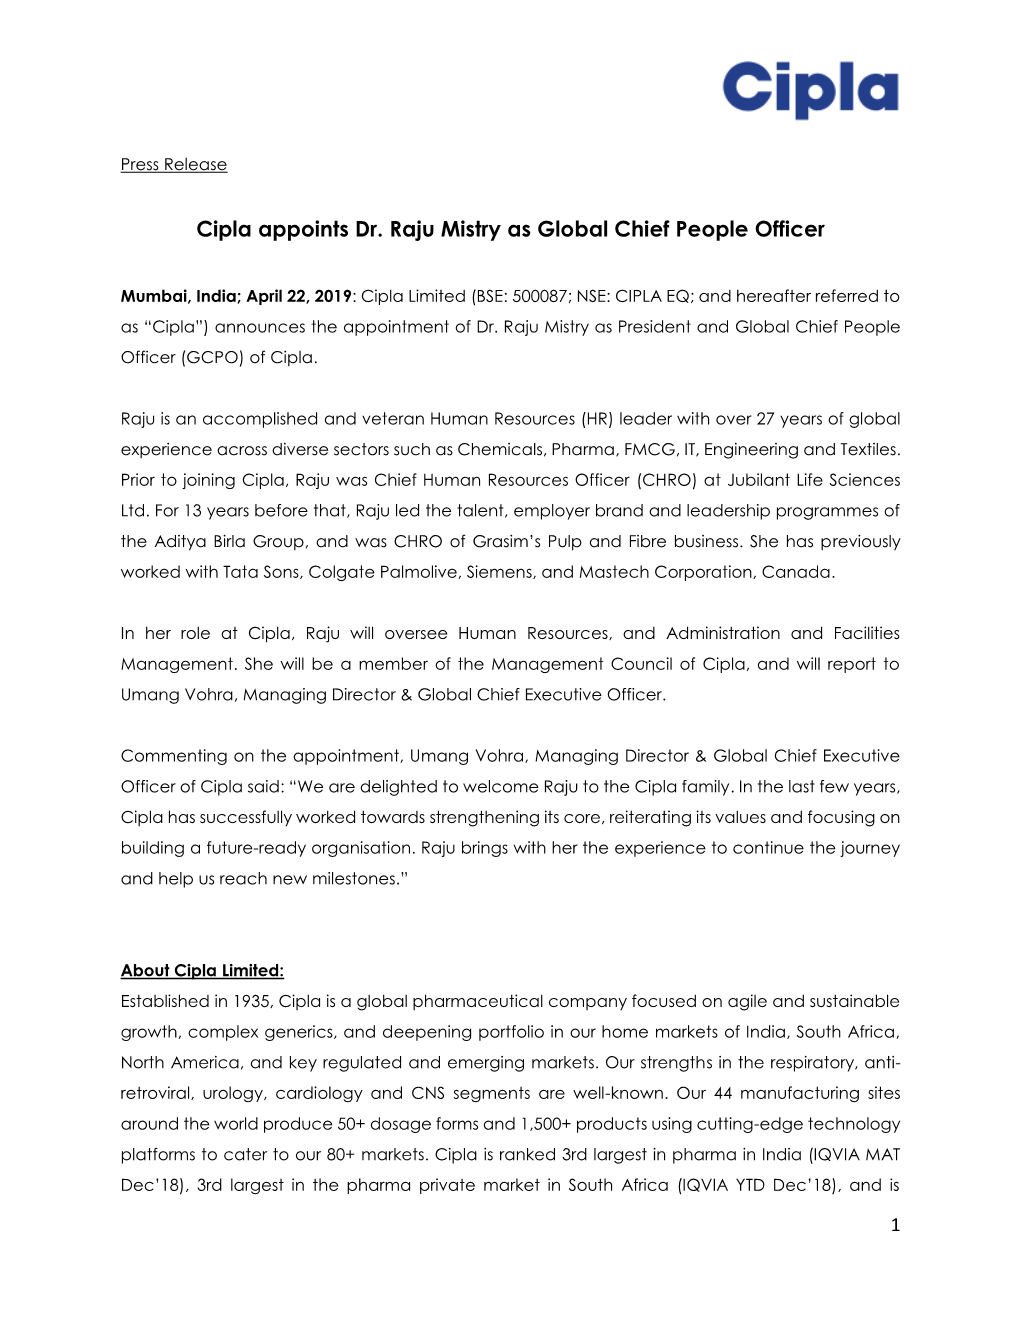 Cipla Appoints Dr. Raju Mistry As Global Chief People Officer